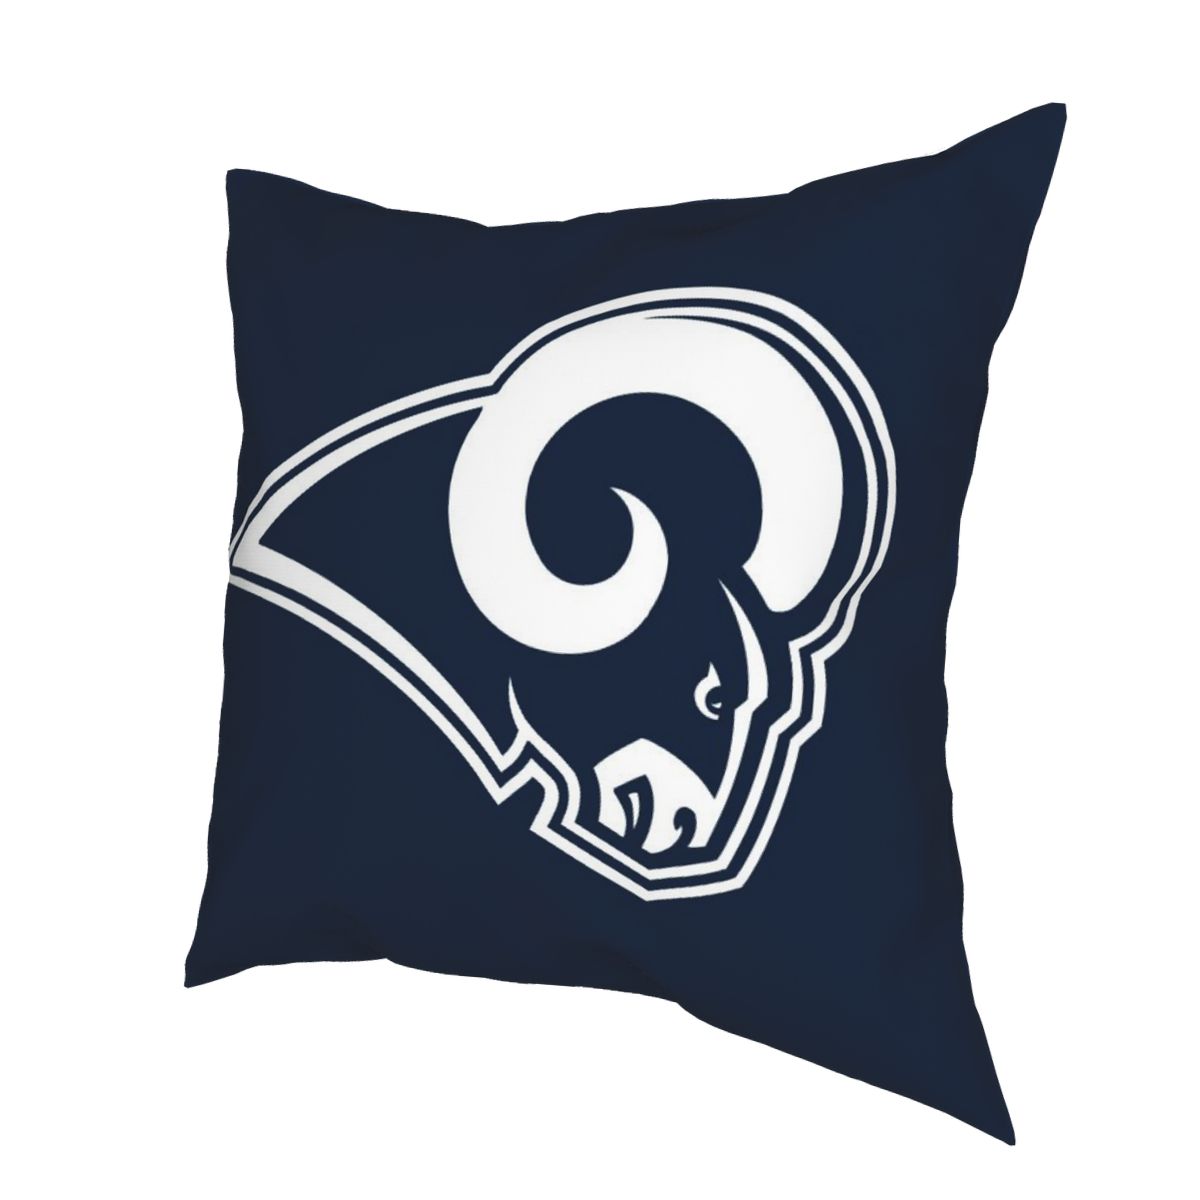 Custom Decorative Football Pillow Case Los Angeles Rams Navy Pillowcase Personalized Throw Pillow Covers